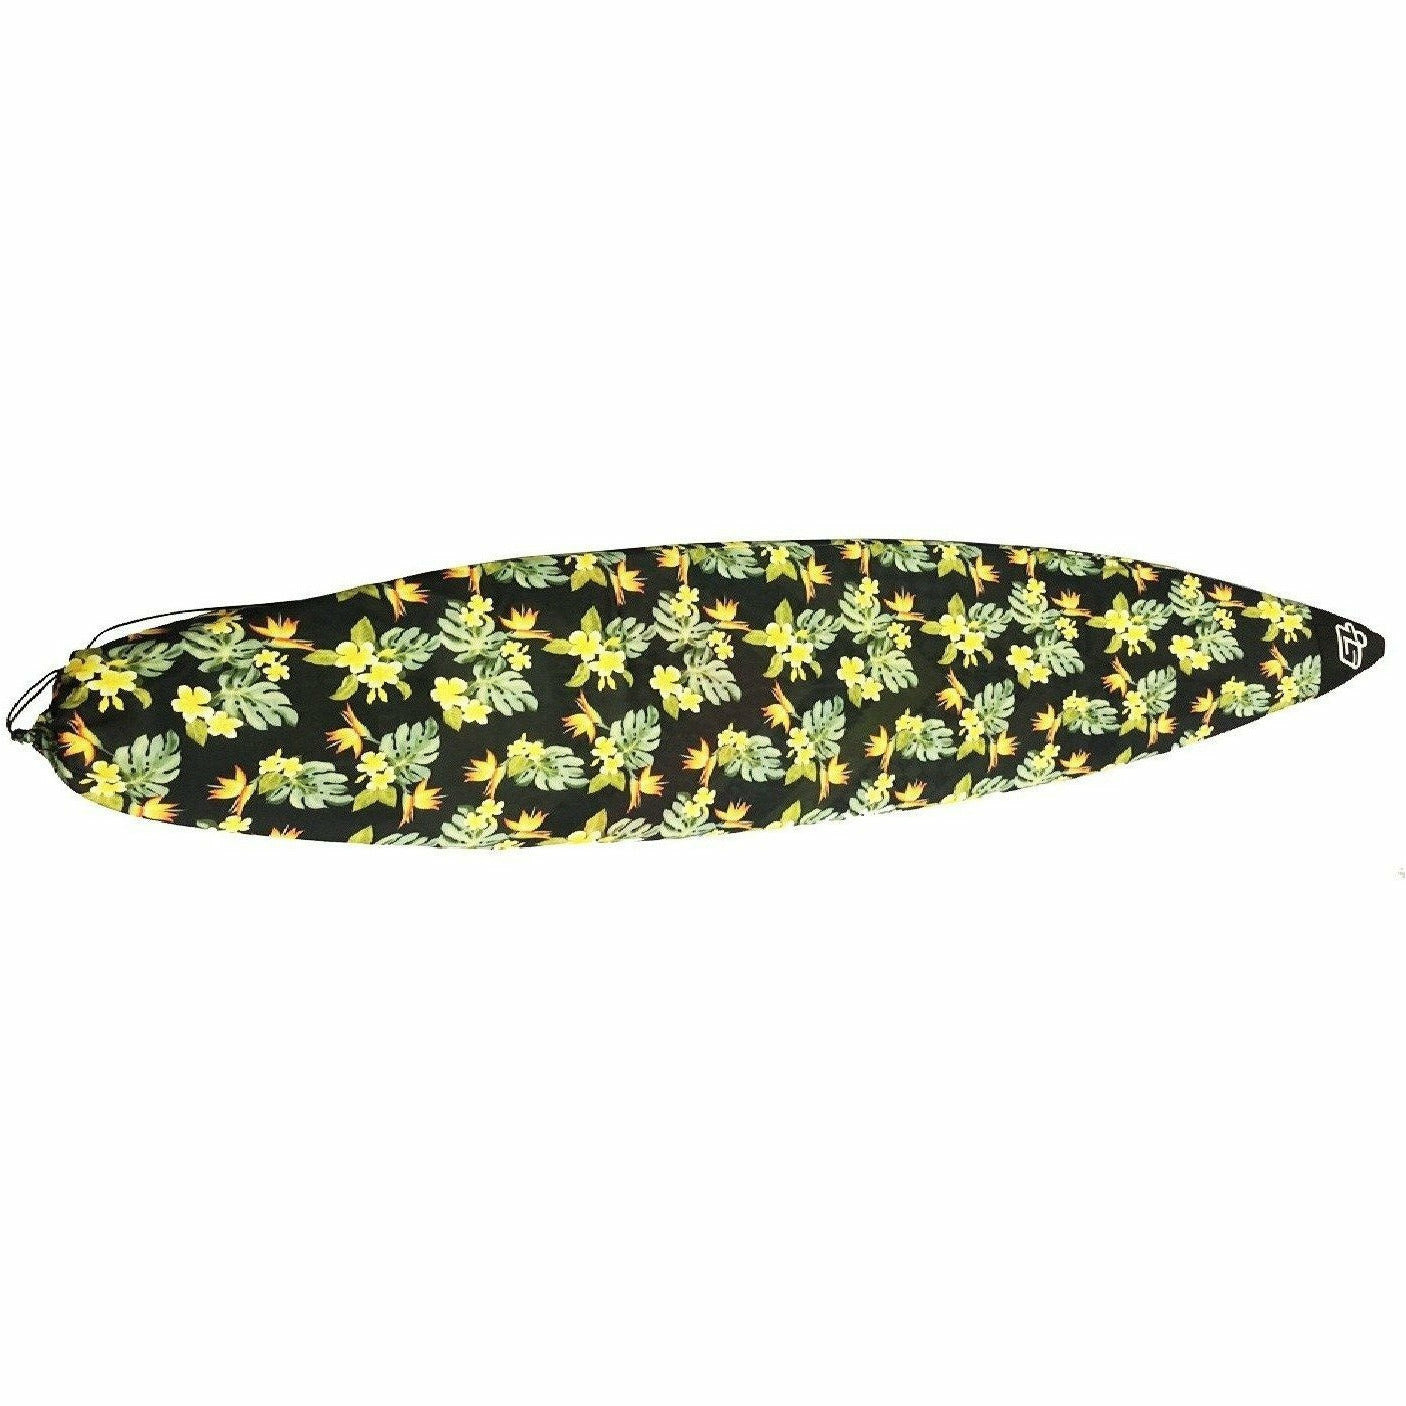 Island Style - Pointy Nose Surfboard Stretchy Sock (Digi Printed)